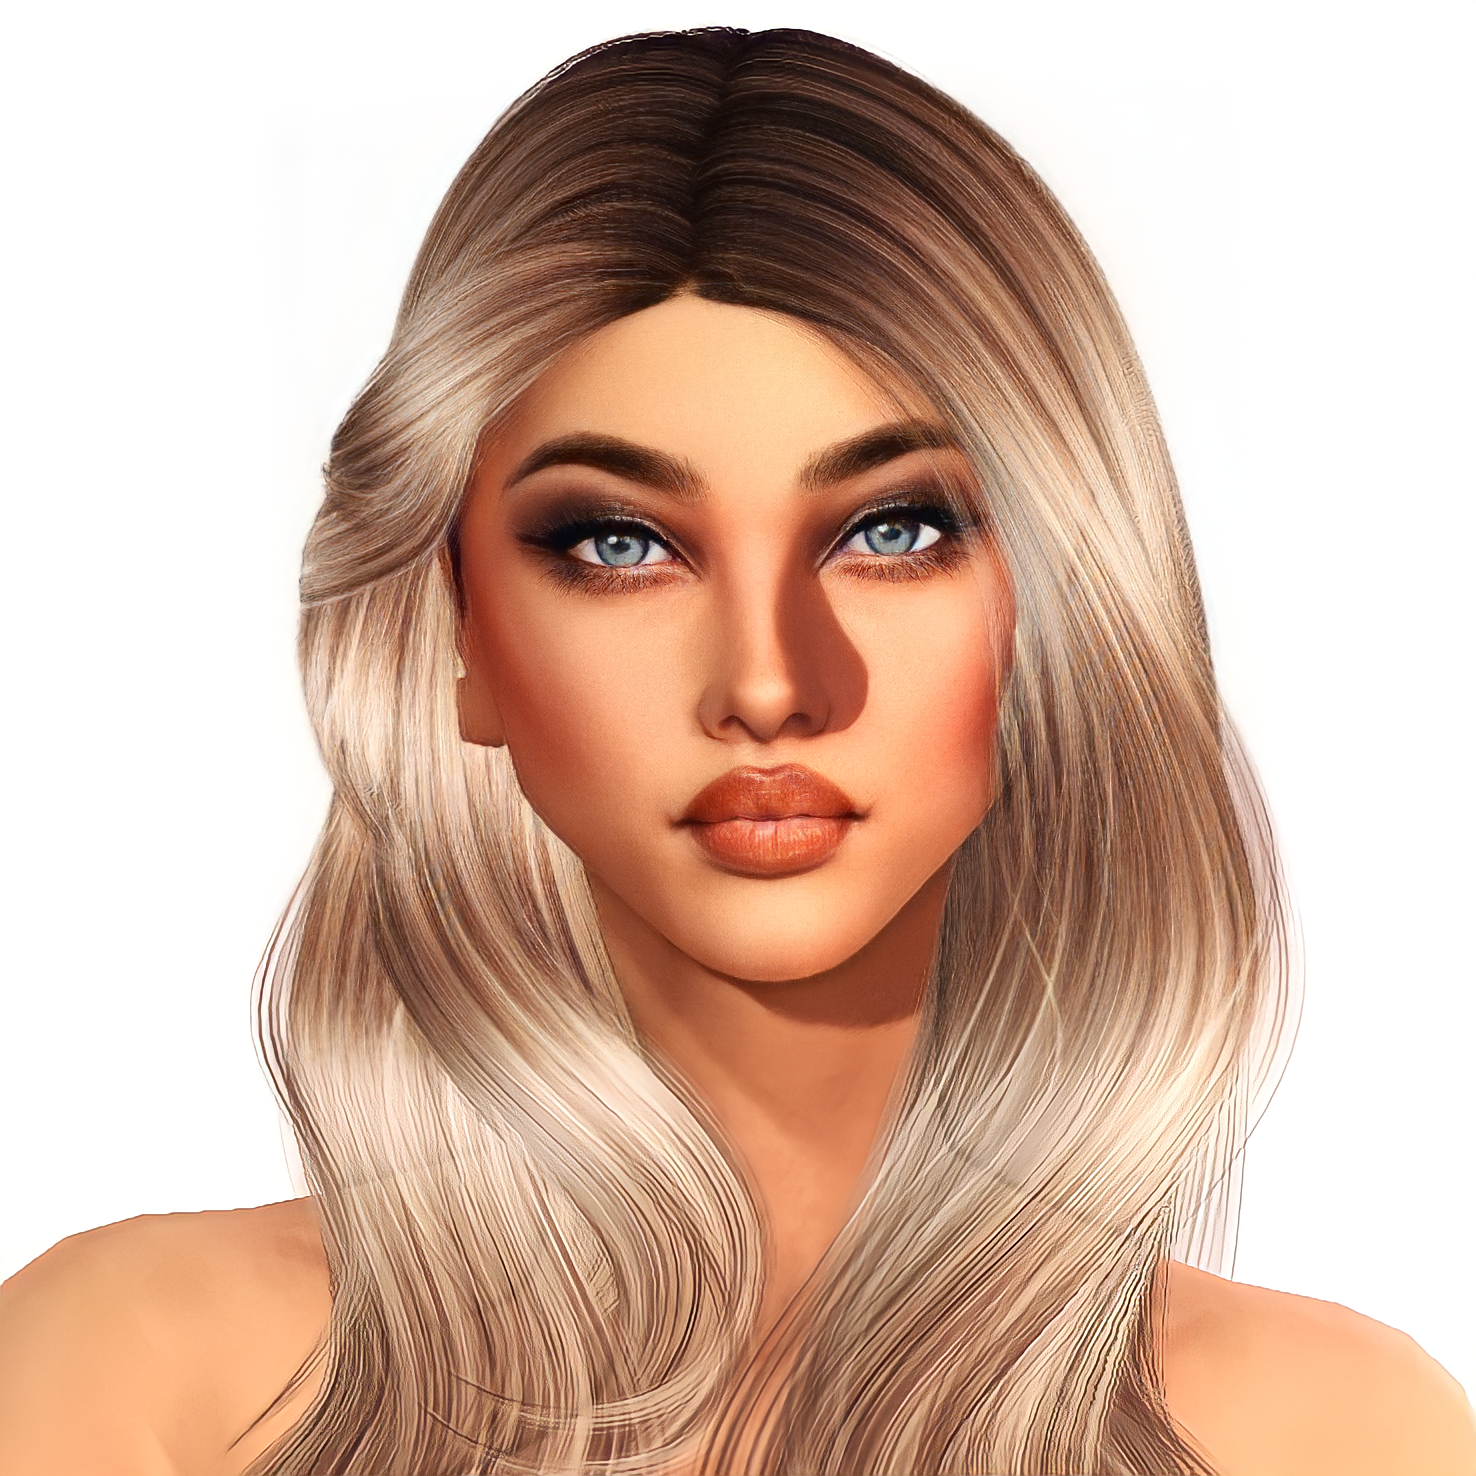 Royalty 2.8.3 - The Sims 4 Mods - CurseForge